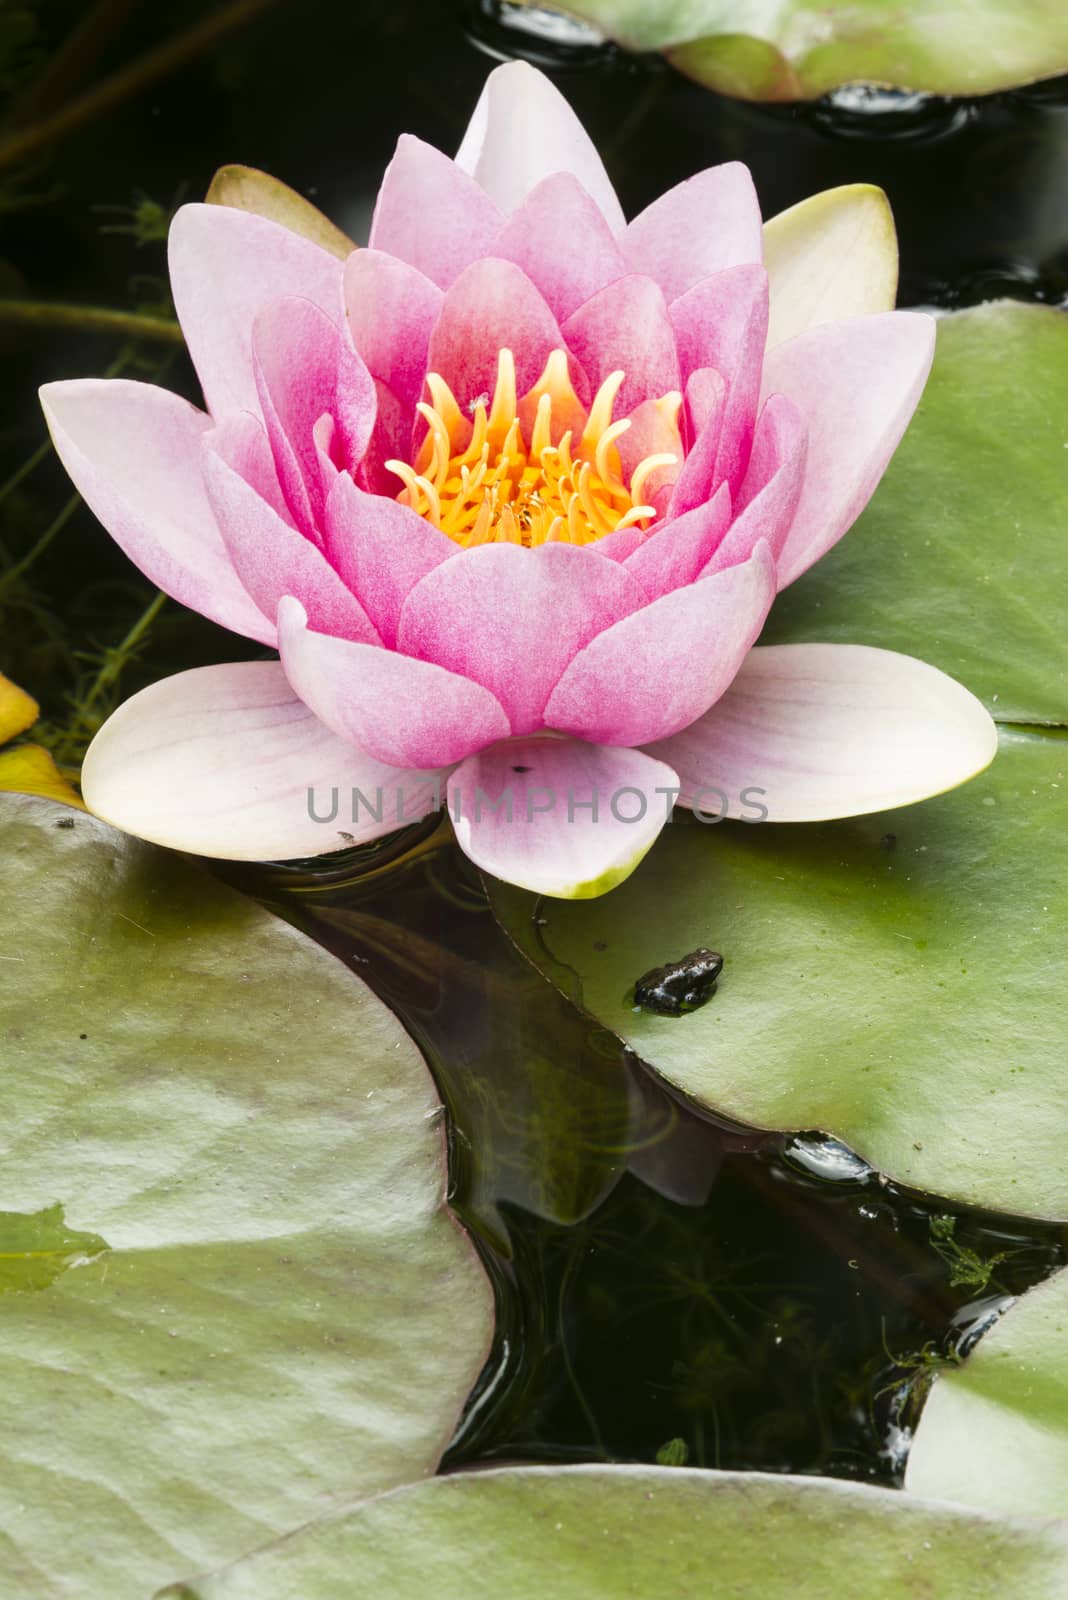 Young toad coming out of water under a waterlily flower.